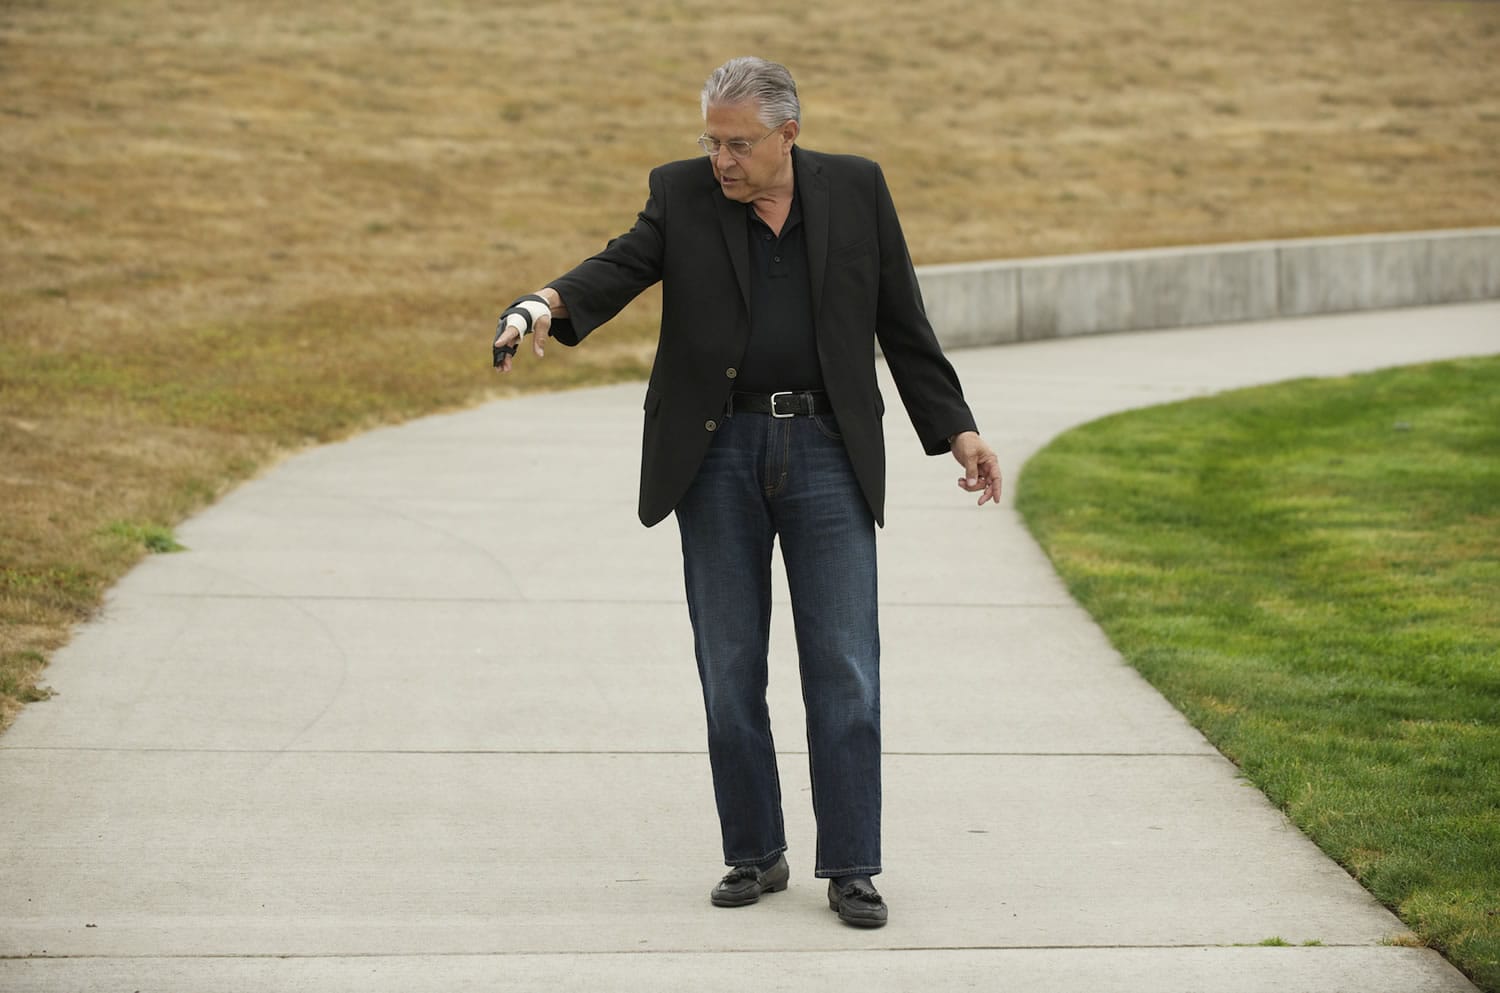 Gerry Matthieu revisits the scene of a Sept. 8 attack by a dog at Greyhawk Community Park on Thursday.